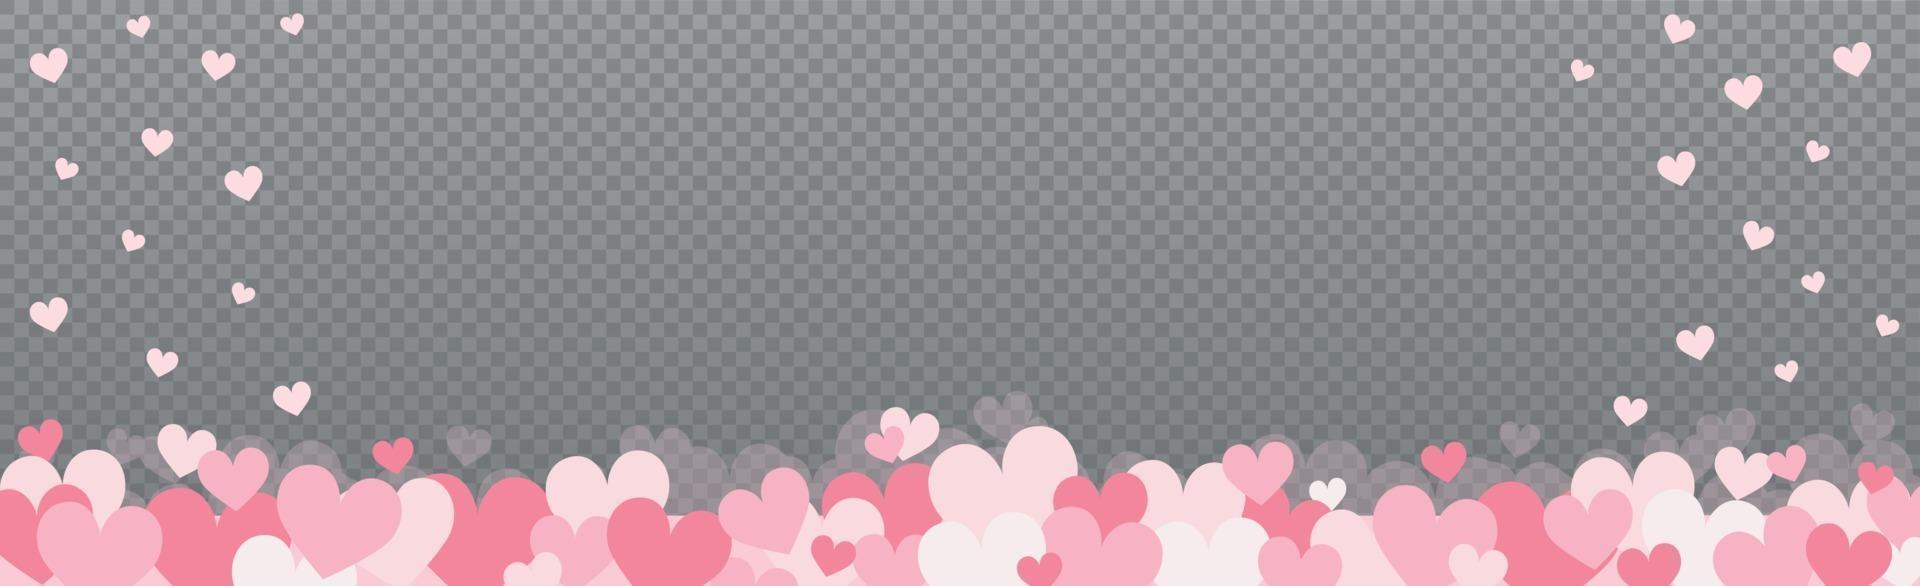 Gently pink-red hearts on a gray checkered background vector